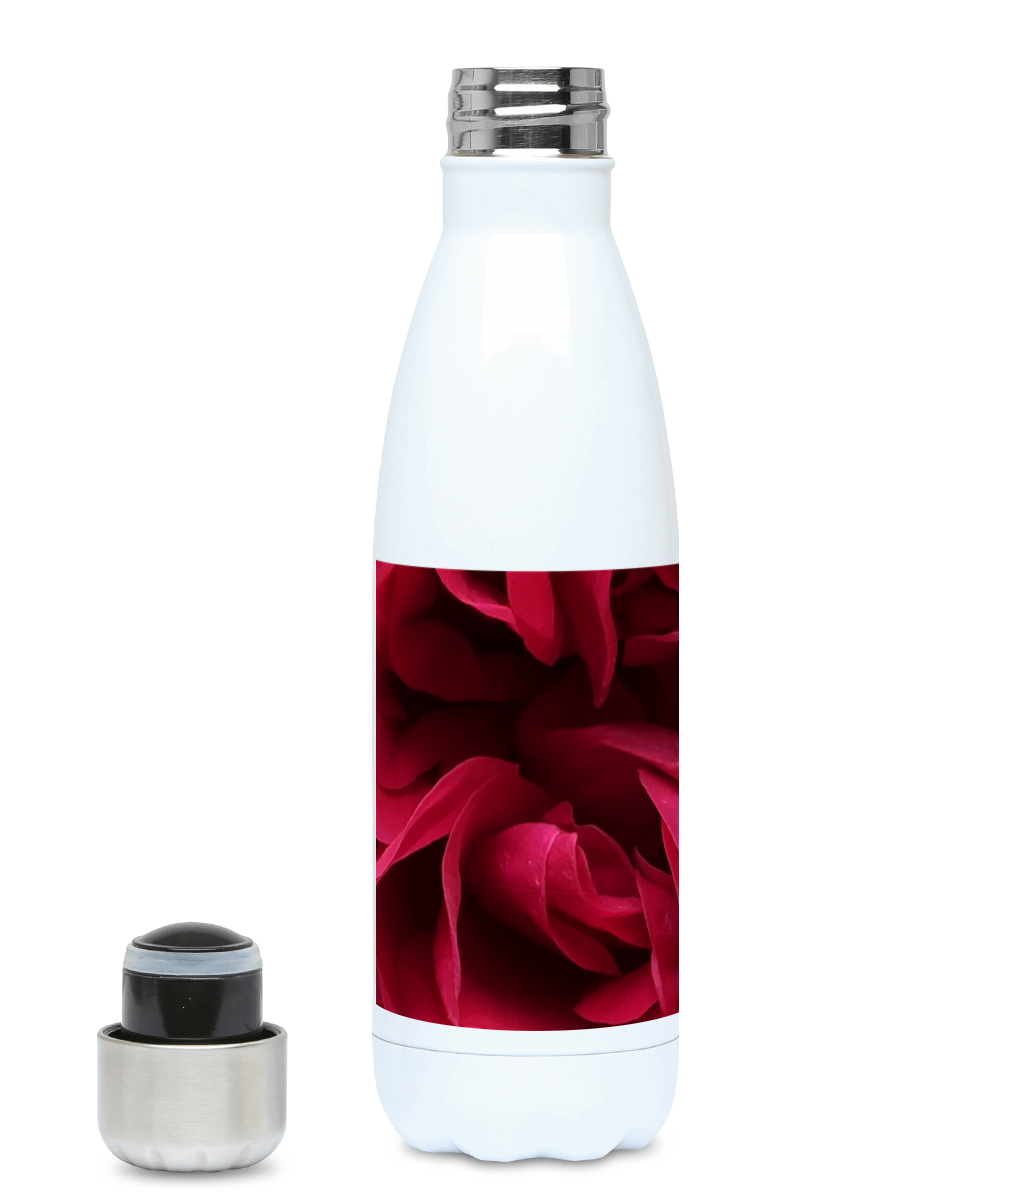 "Back inside to feel the warmth" Red Flower 500ml Water Bottle - Nature of Flowers